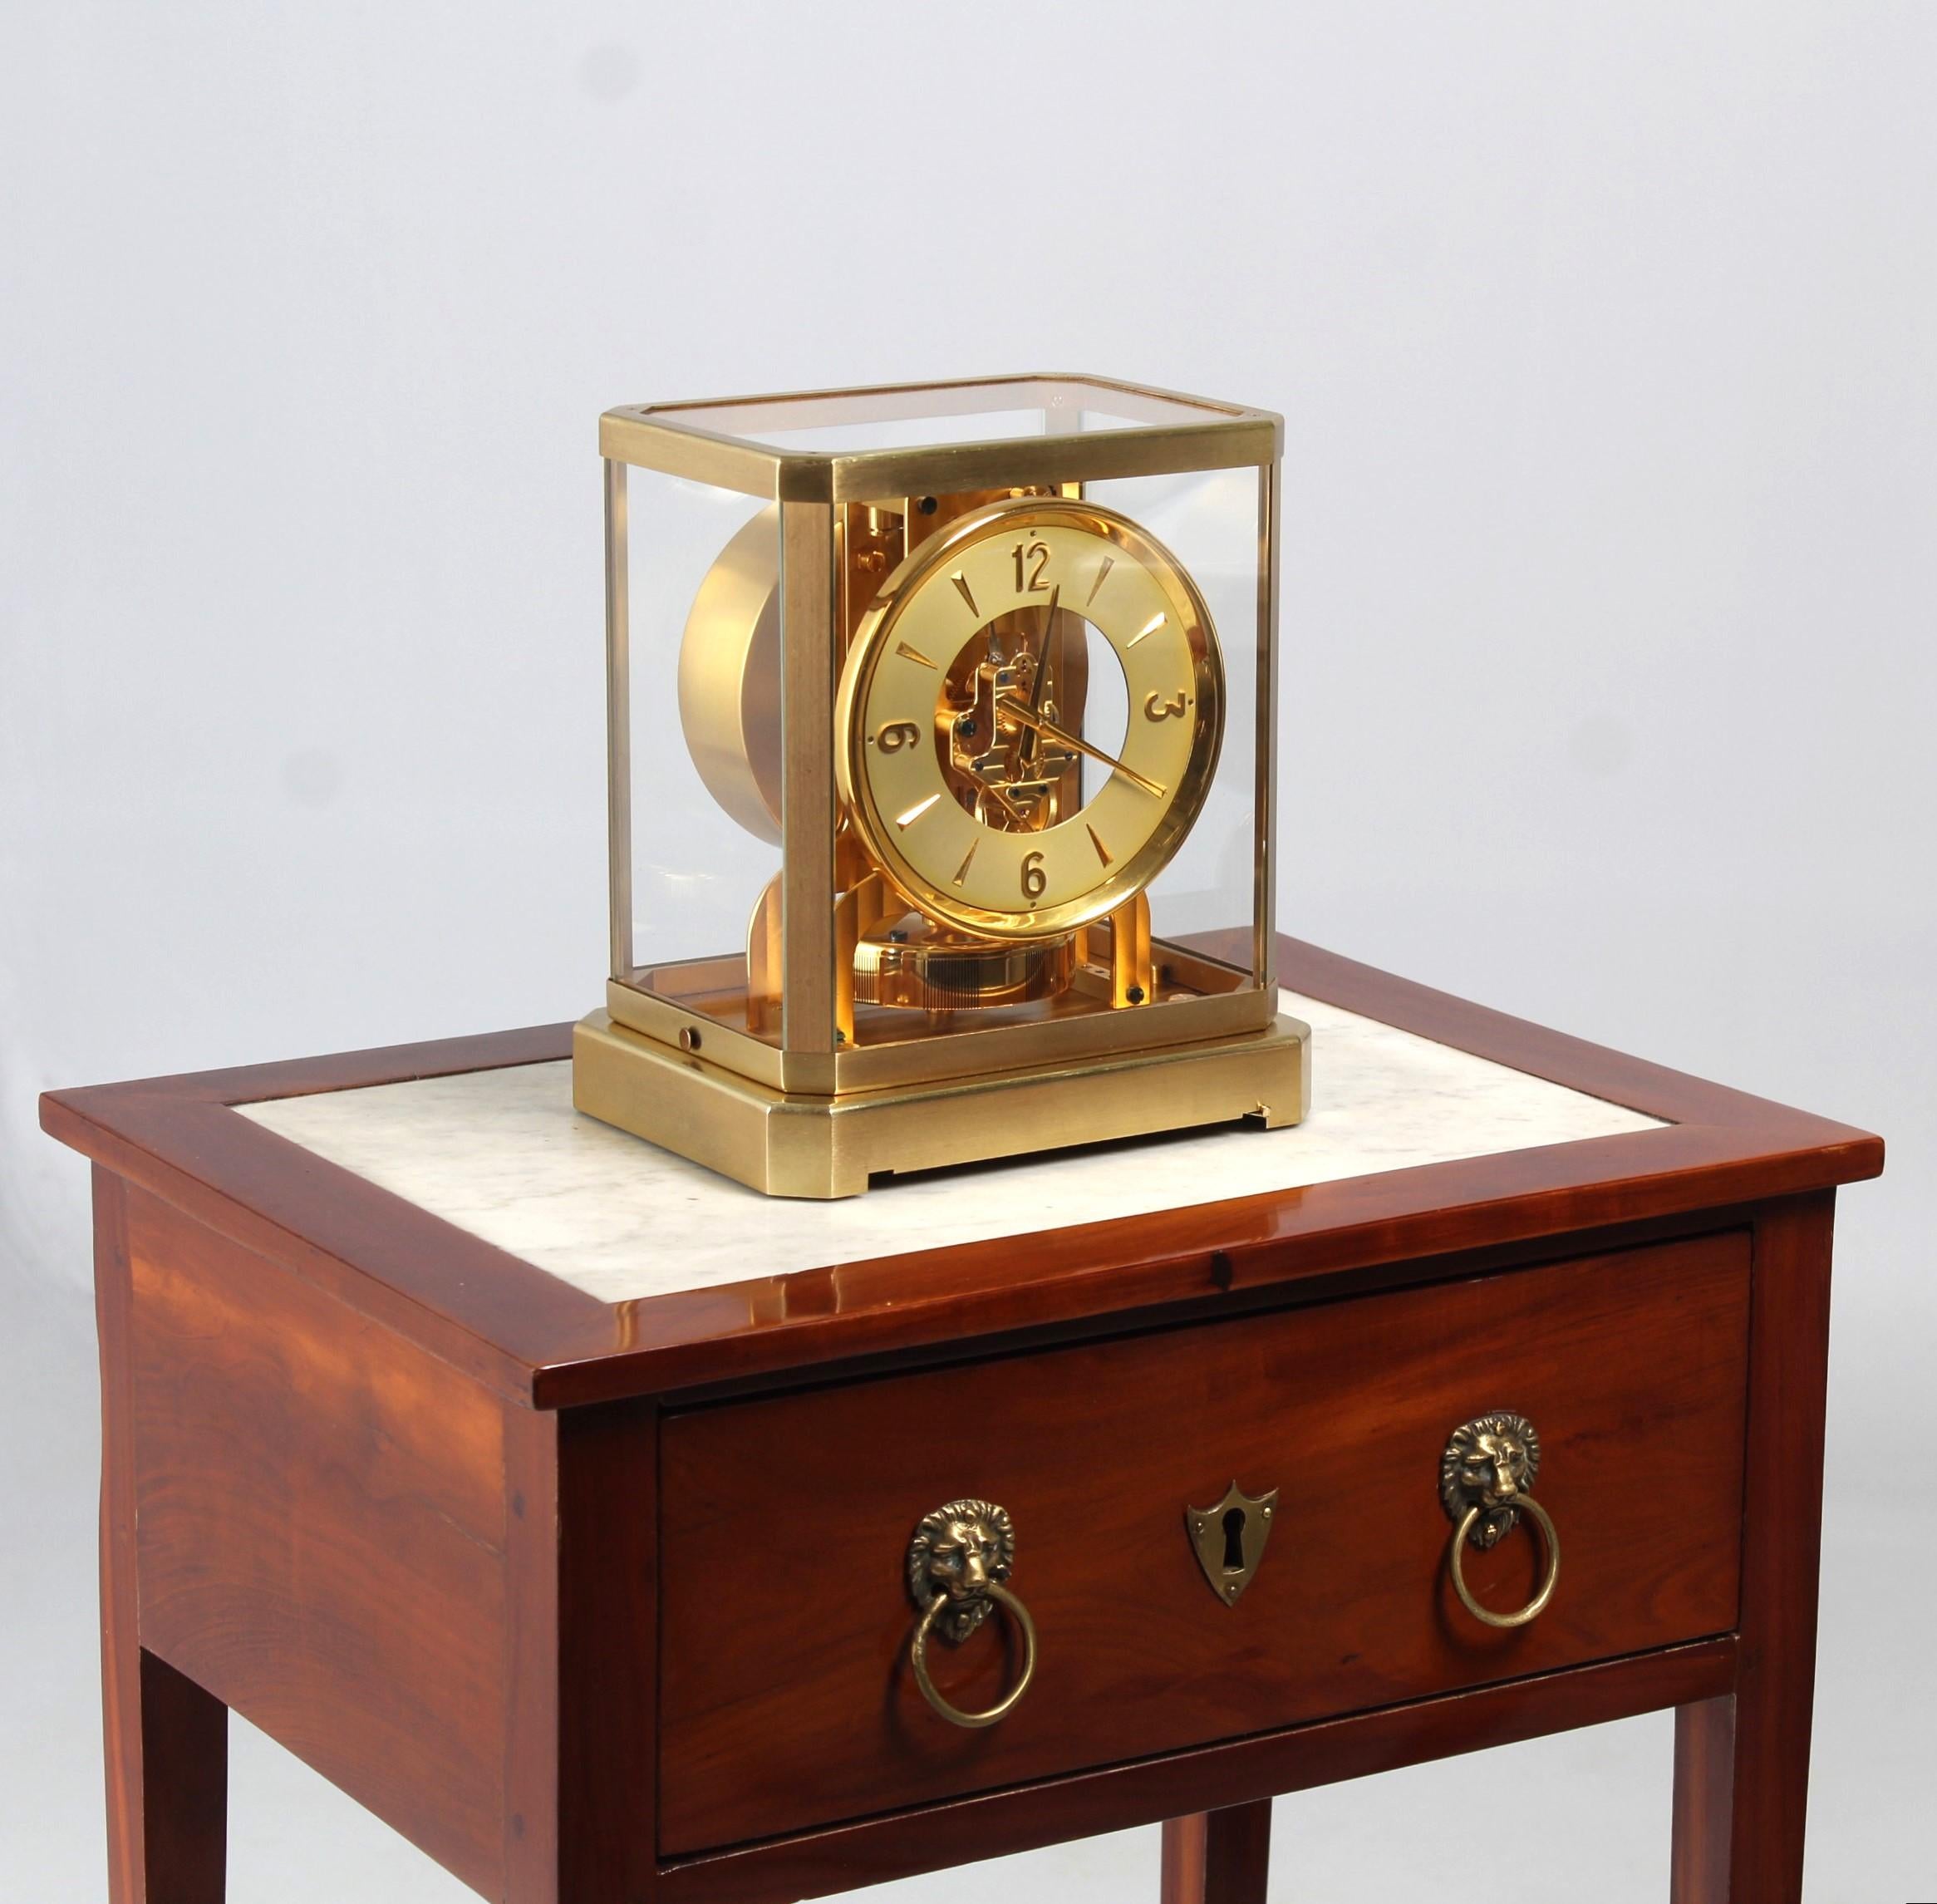 Early Atmos clock from Jaeger LeCoultre

Switzerland
Brass, partly gold-plated
Year of manufacture 1950

Dimensions: H x W x D: 23.5 x 21 x 16.5 cm

Description:
Atmos II in matt brushed case. Blued screws, knurled screw on the front for regulating